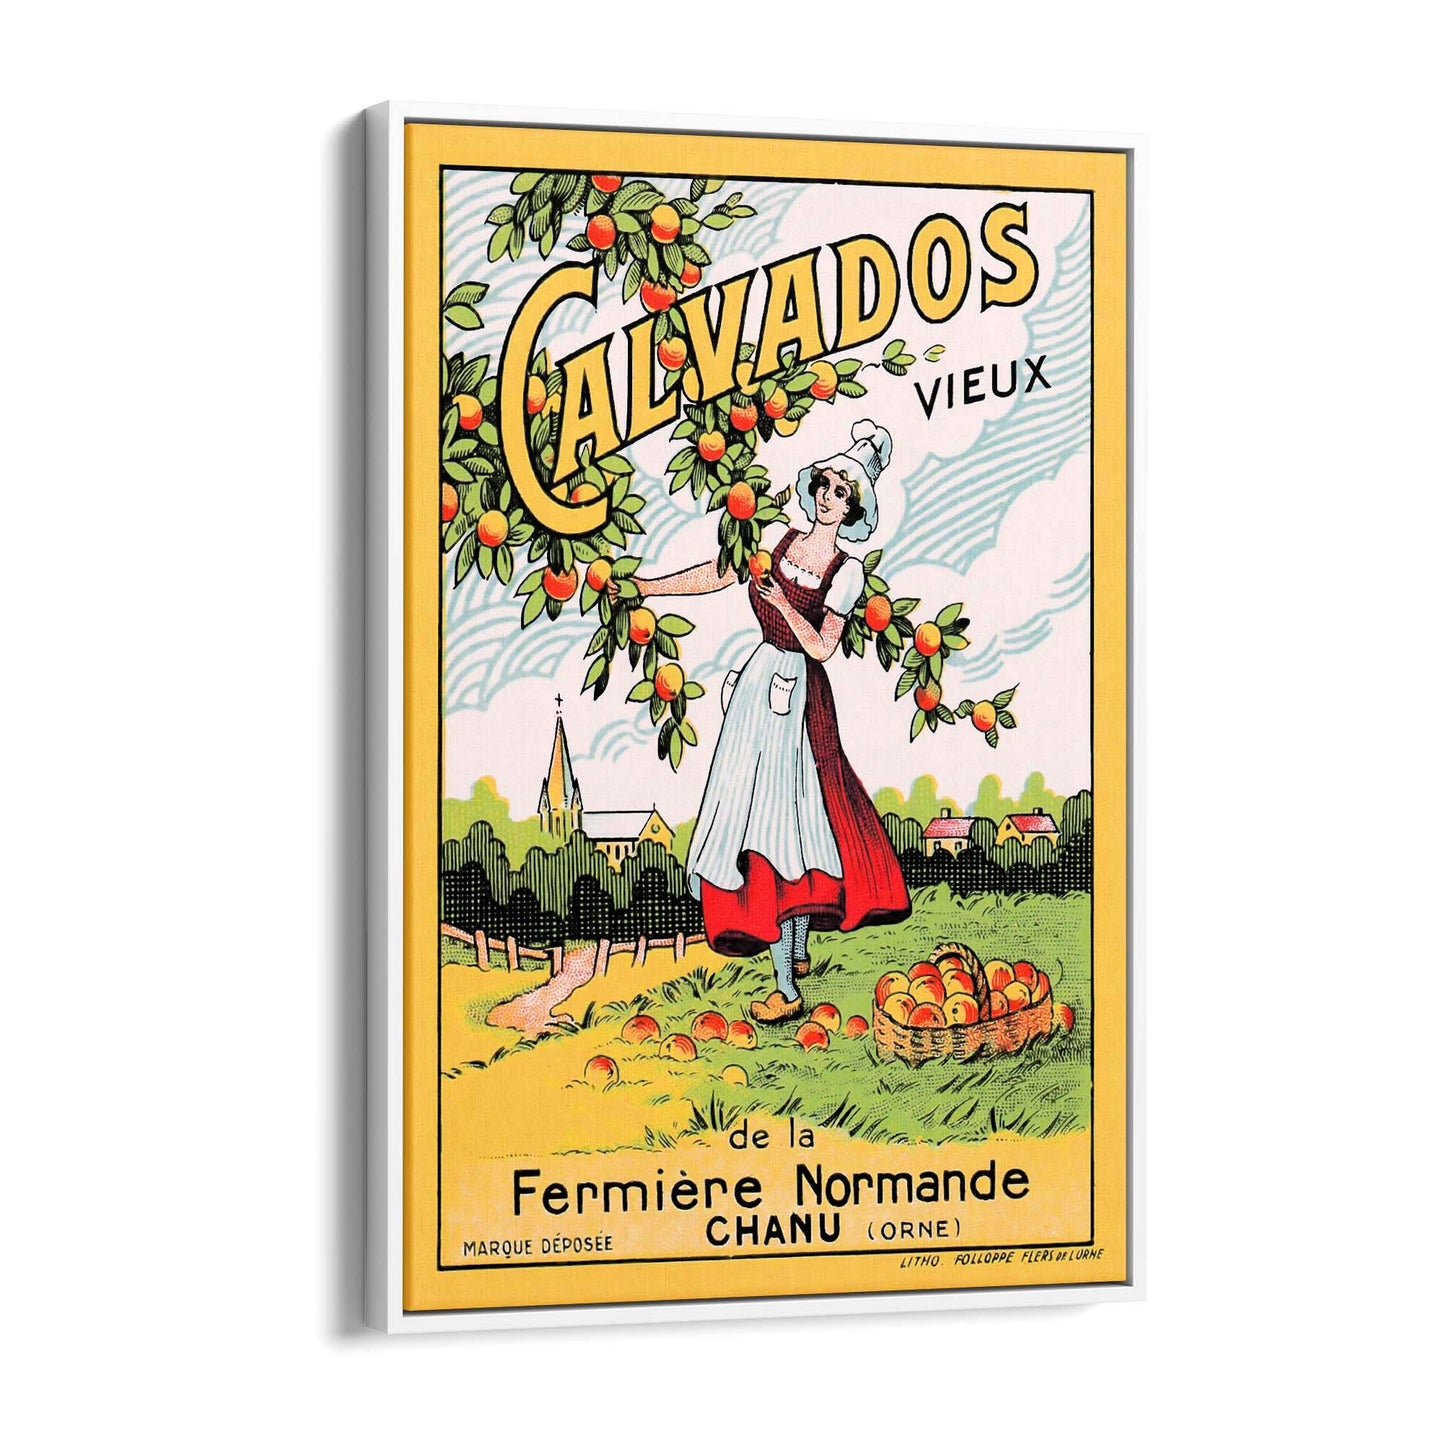 Old Calvados (Brandy) Vintage Drinks Advert Wall Art - The Affordable Art Company